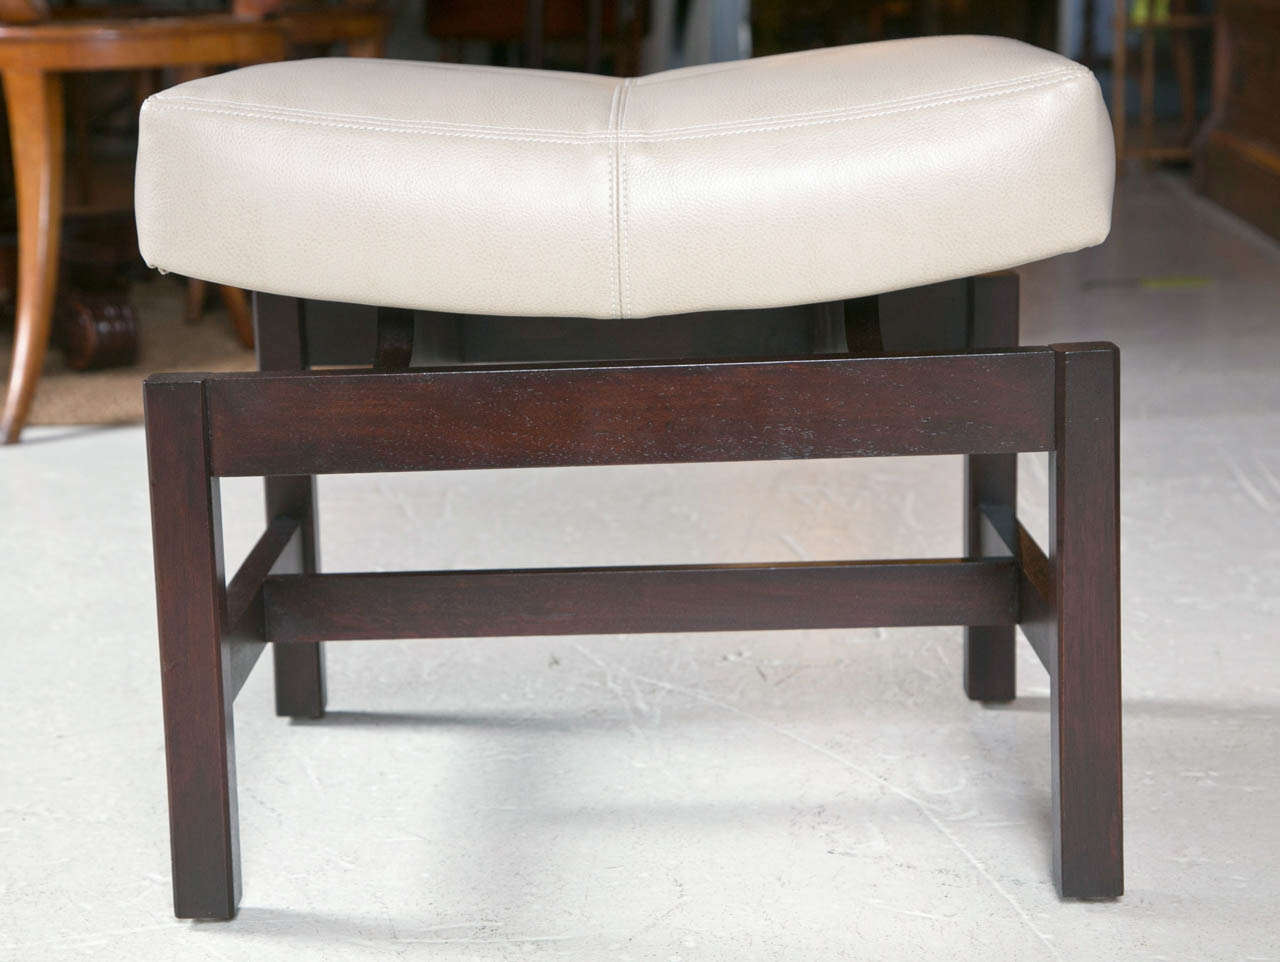 Jens Risom (attributed) Bench With Floating Saddle Seat. Newly refinished base and new top stitched cushion